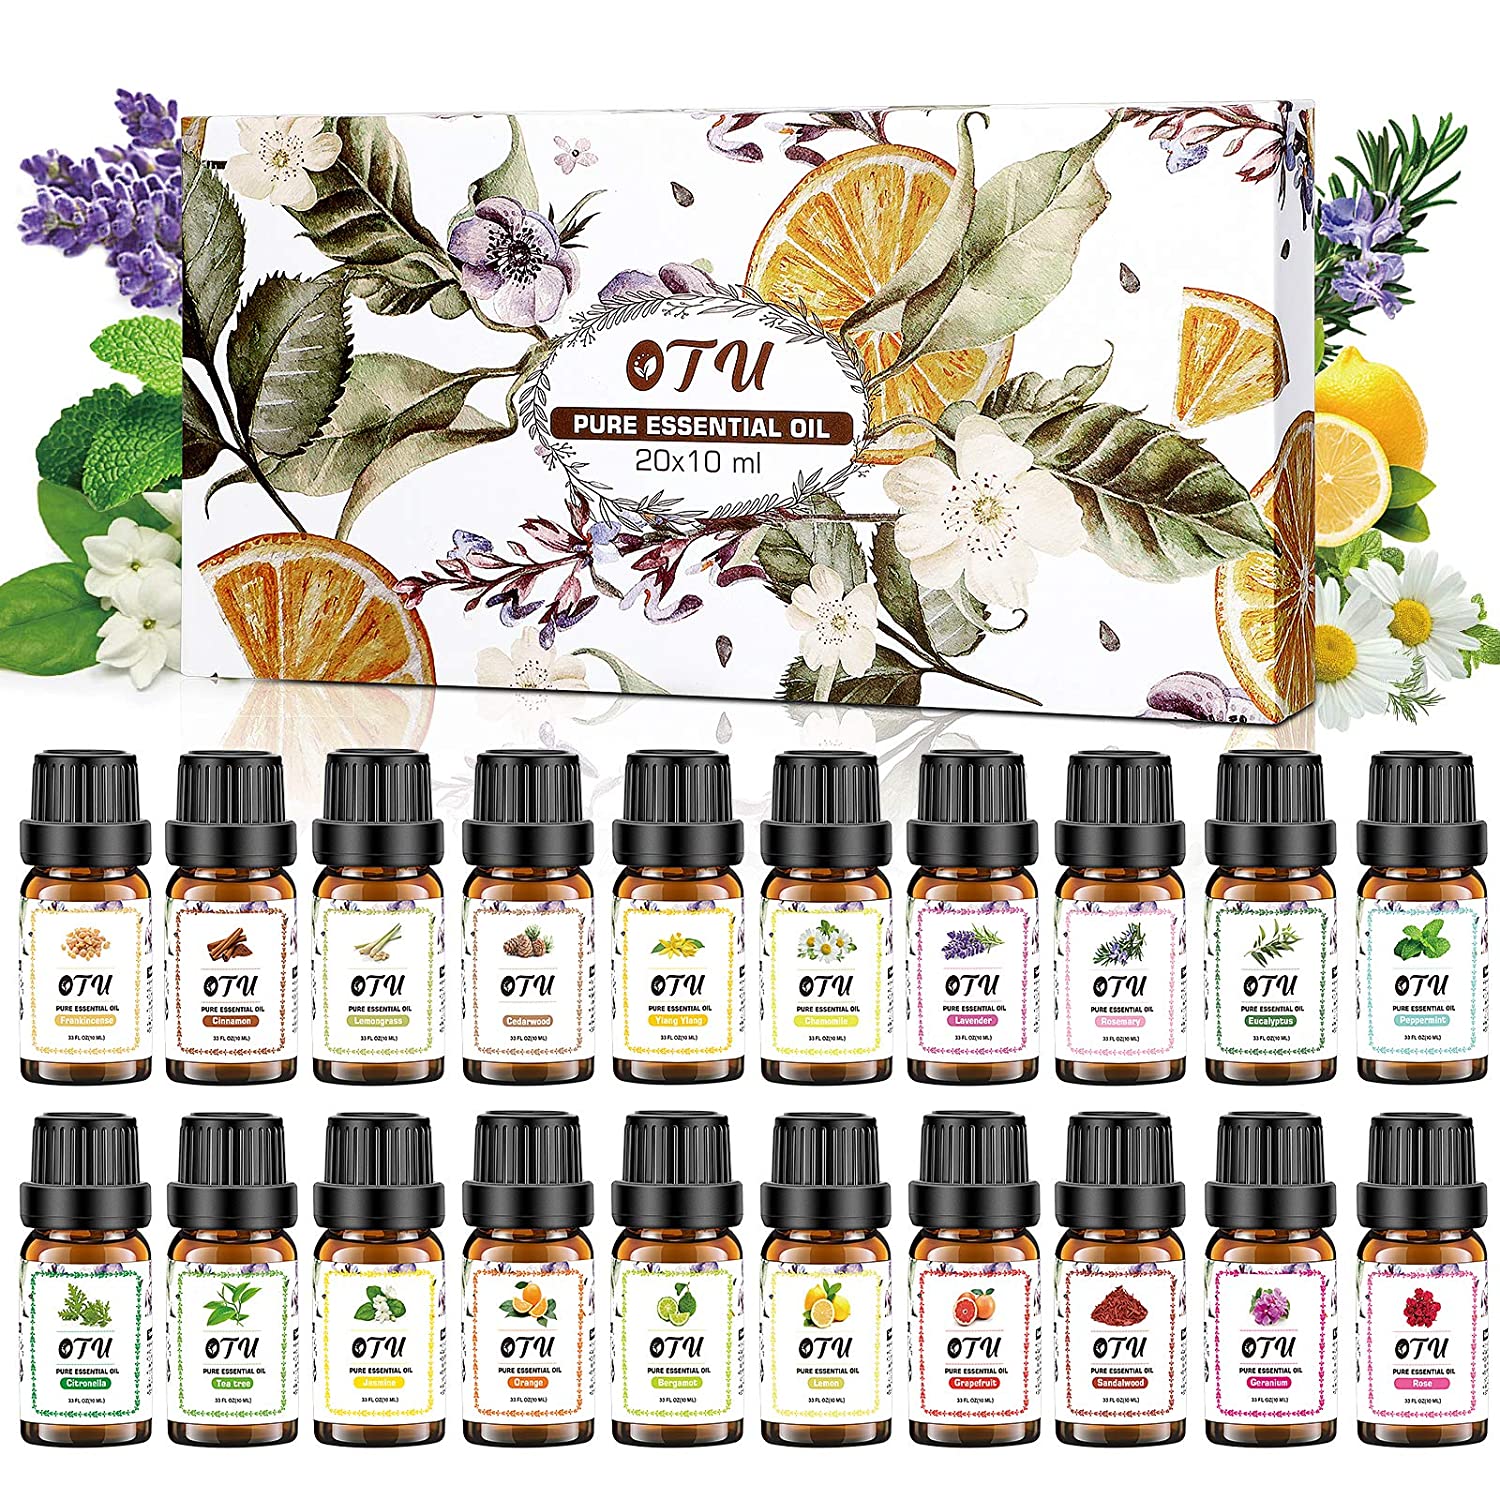 Plant Therapy Top 6 USDA Organic Essential Oil Set - Lavender, Peppermint,  Eucalyptus, Lemon, Tea Tree 100% Pure, Natural Aromatherapy, for Diffusion